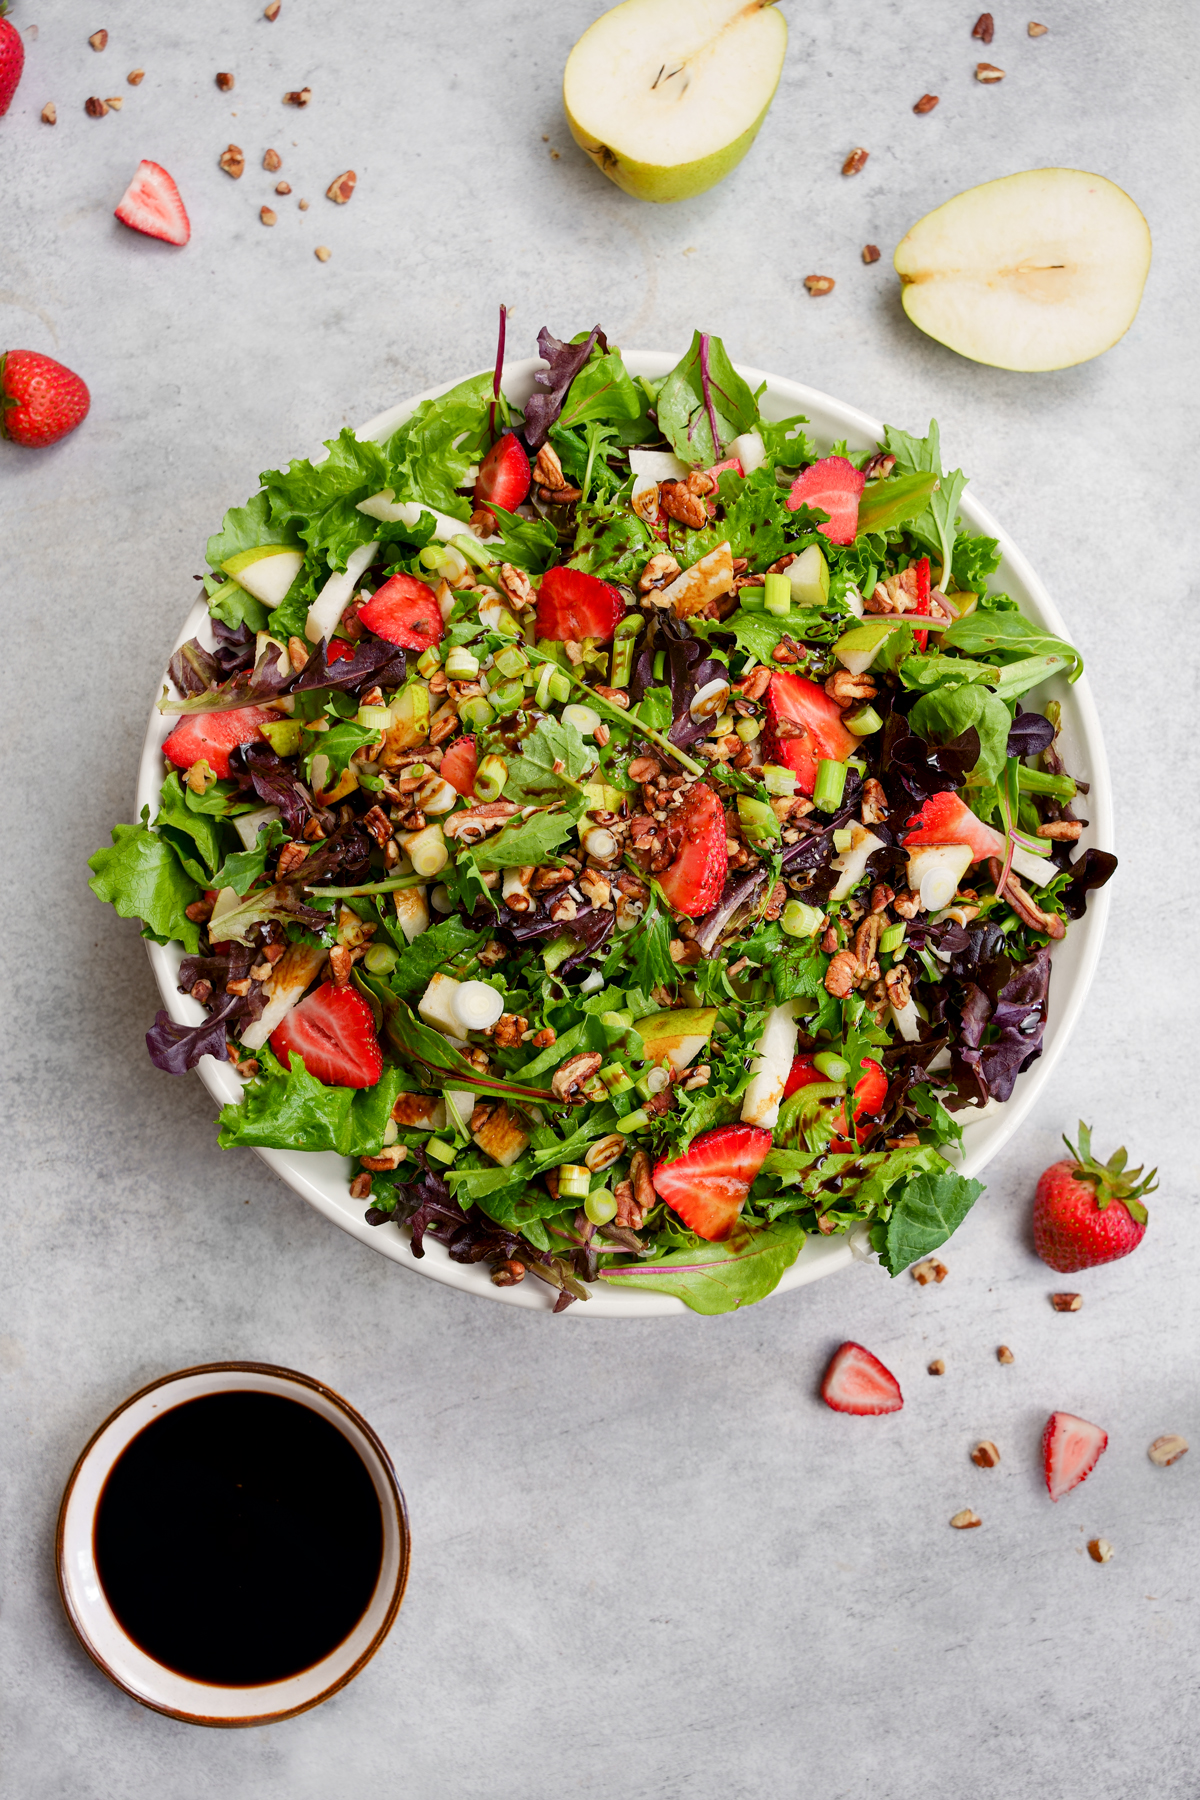 large bowl full of the jicama strawberry salad that features strawberries, pears, pecans, spring mix, and jicama